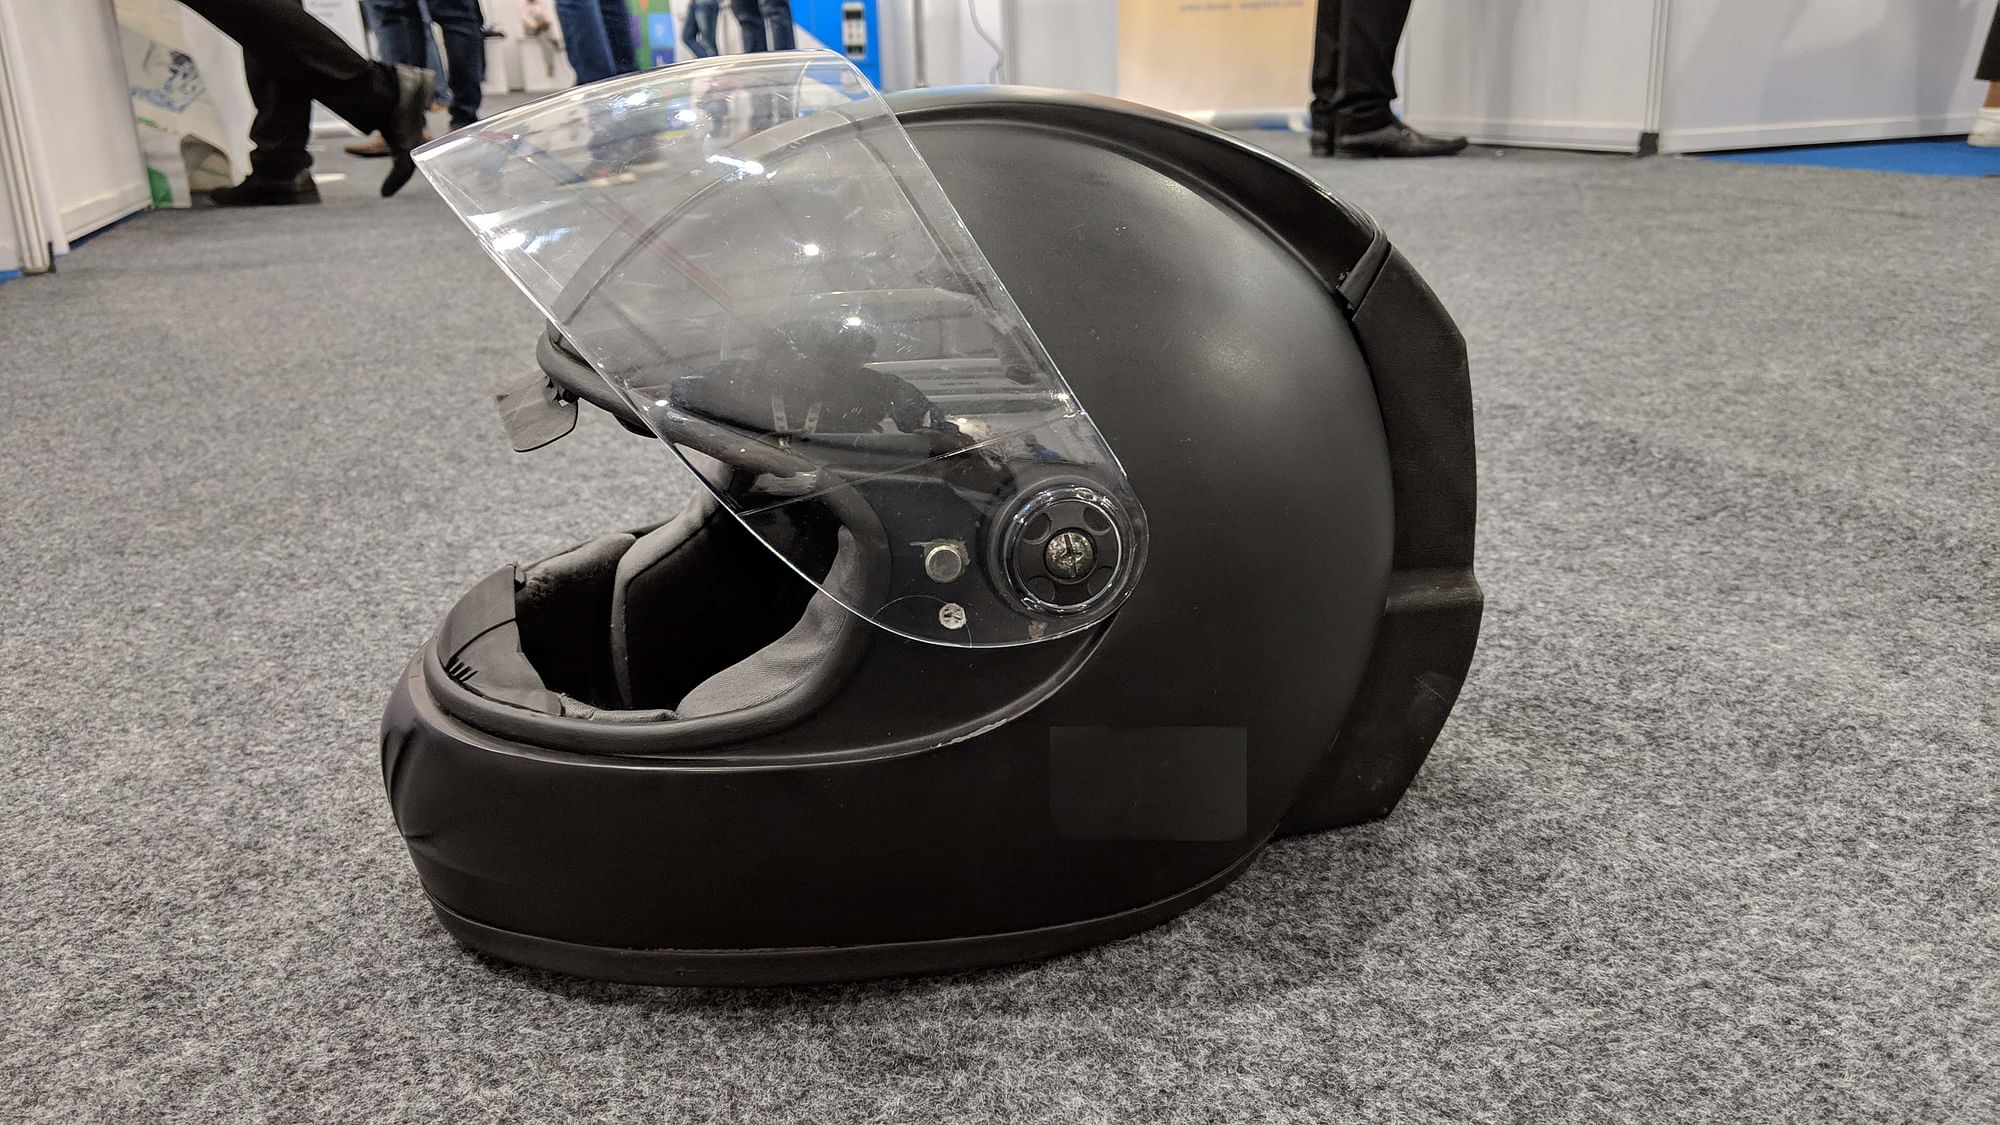 Smart helmet with an air purifier? This is the one.&nbsp;